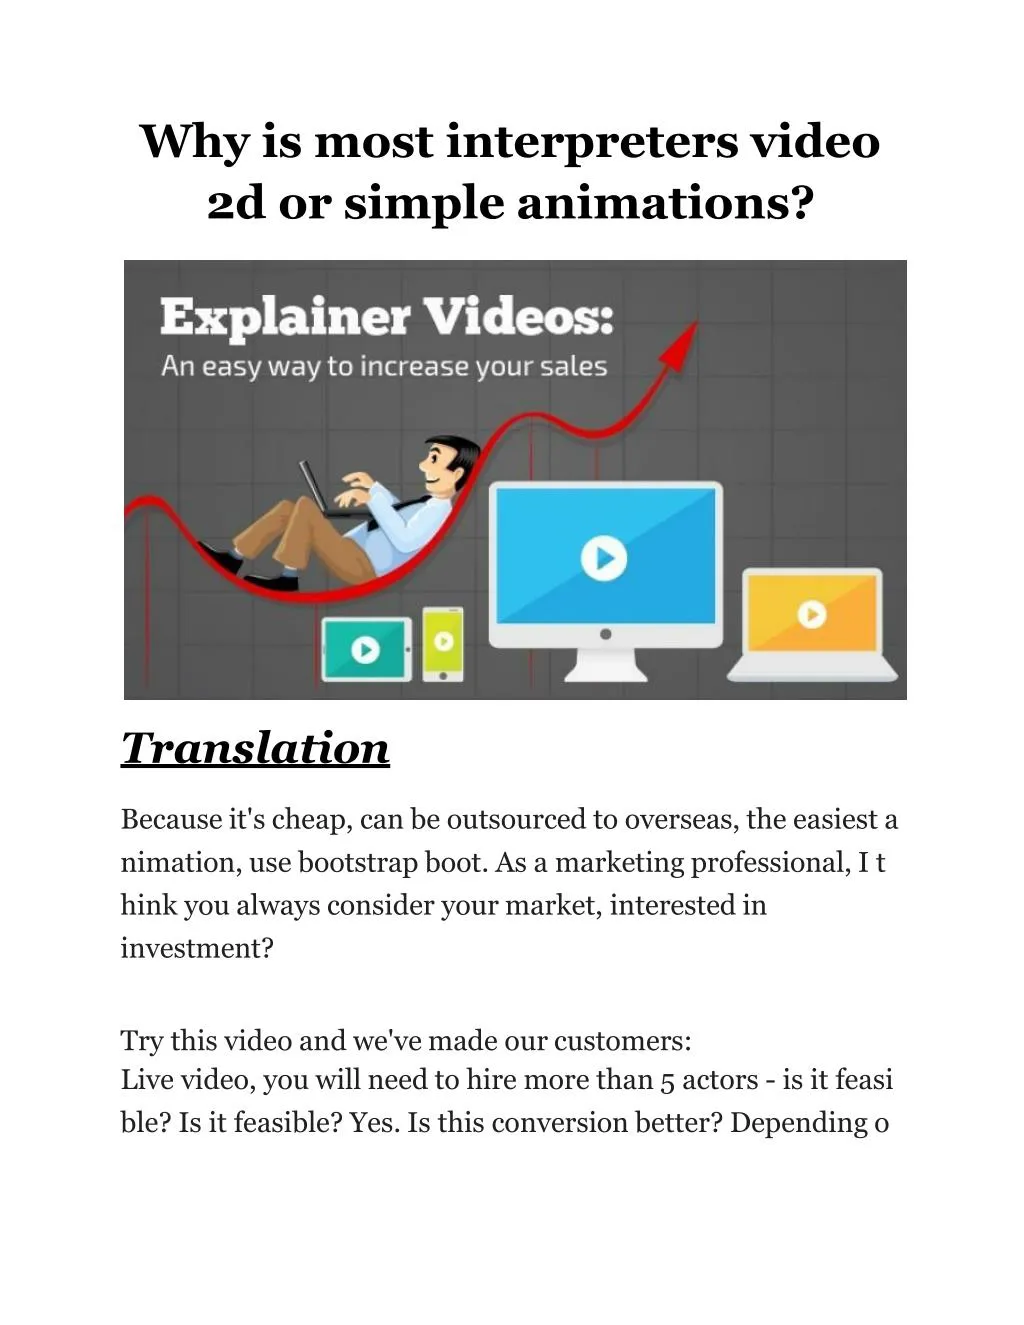 why is most interpreters video 2d or simple animations